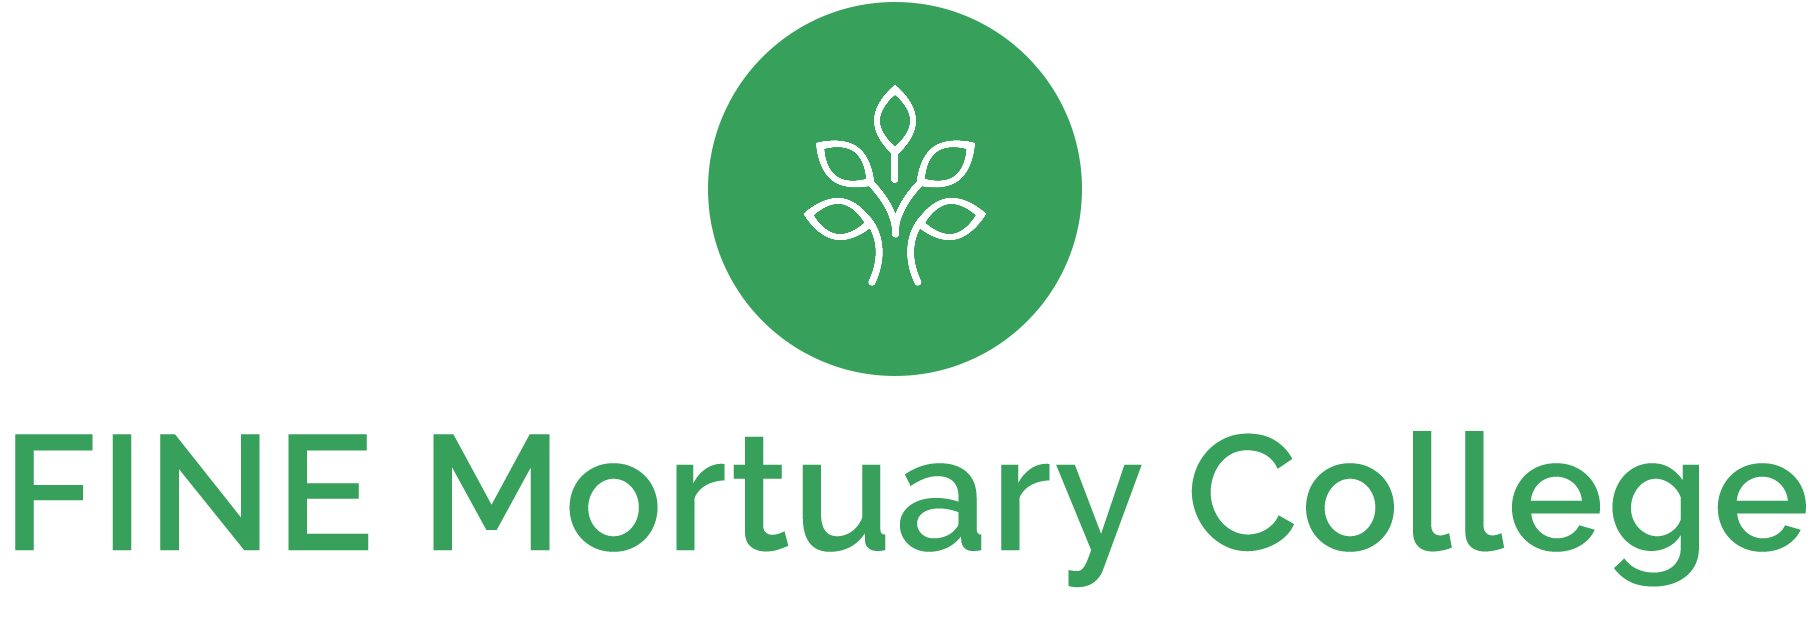 The logo for fine mortuary college has a tree in a green circle.